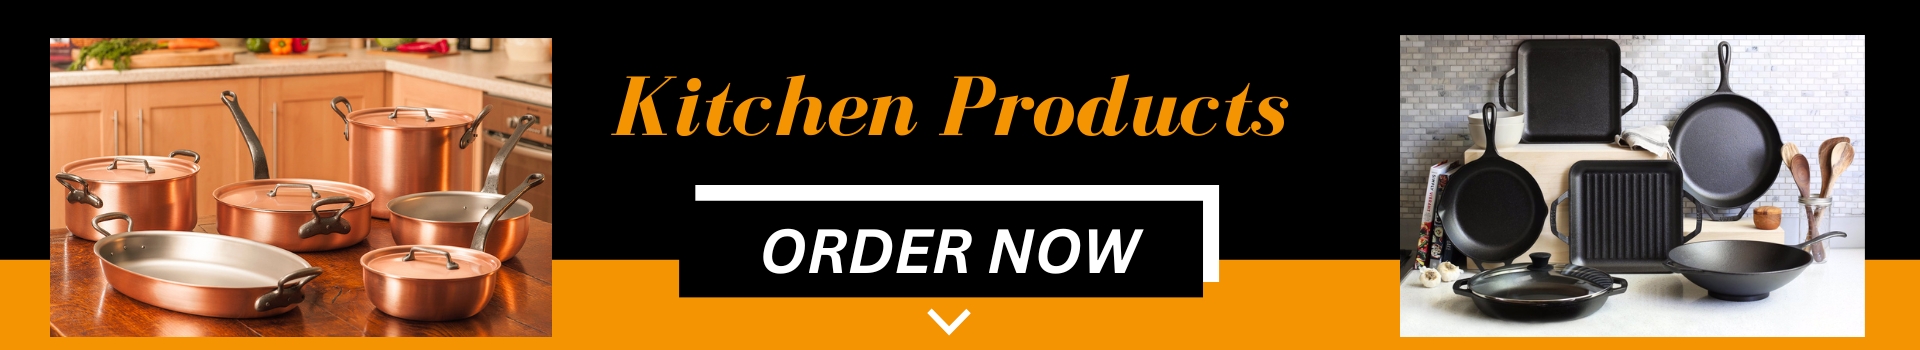 Kitchen Product Banner